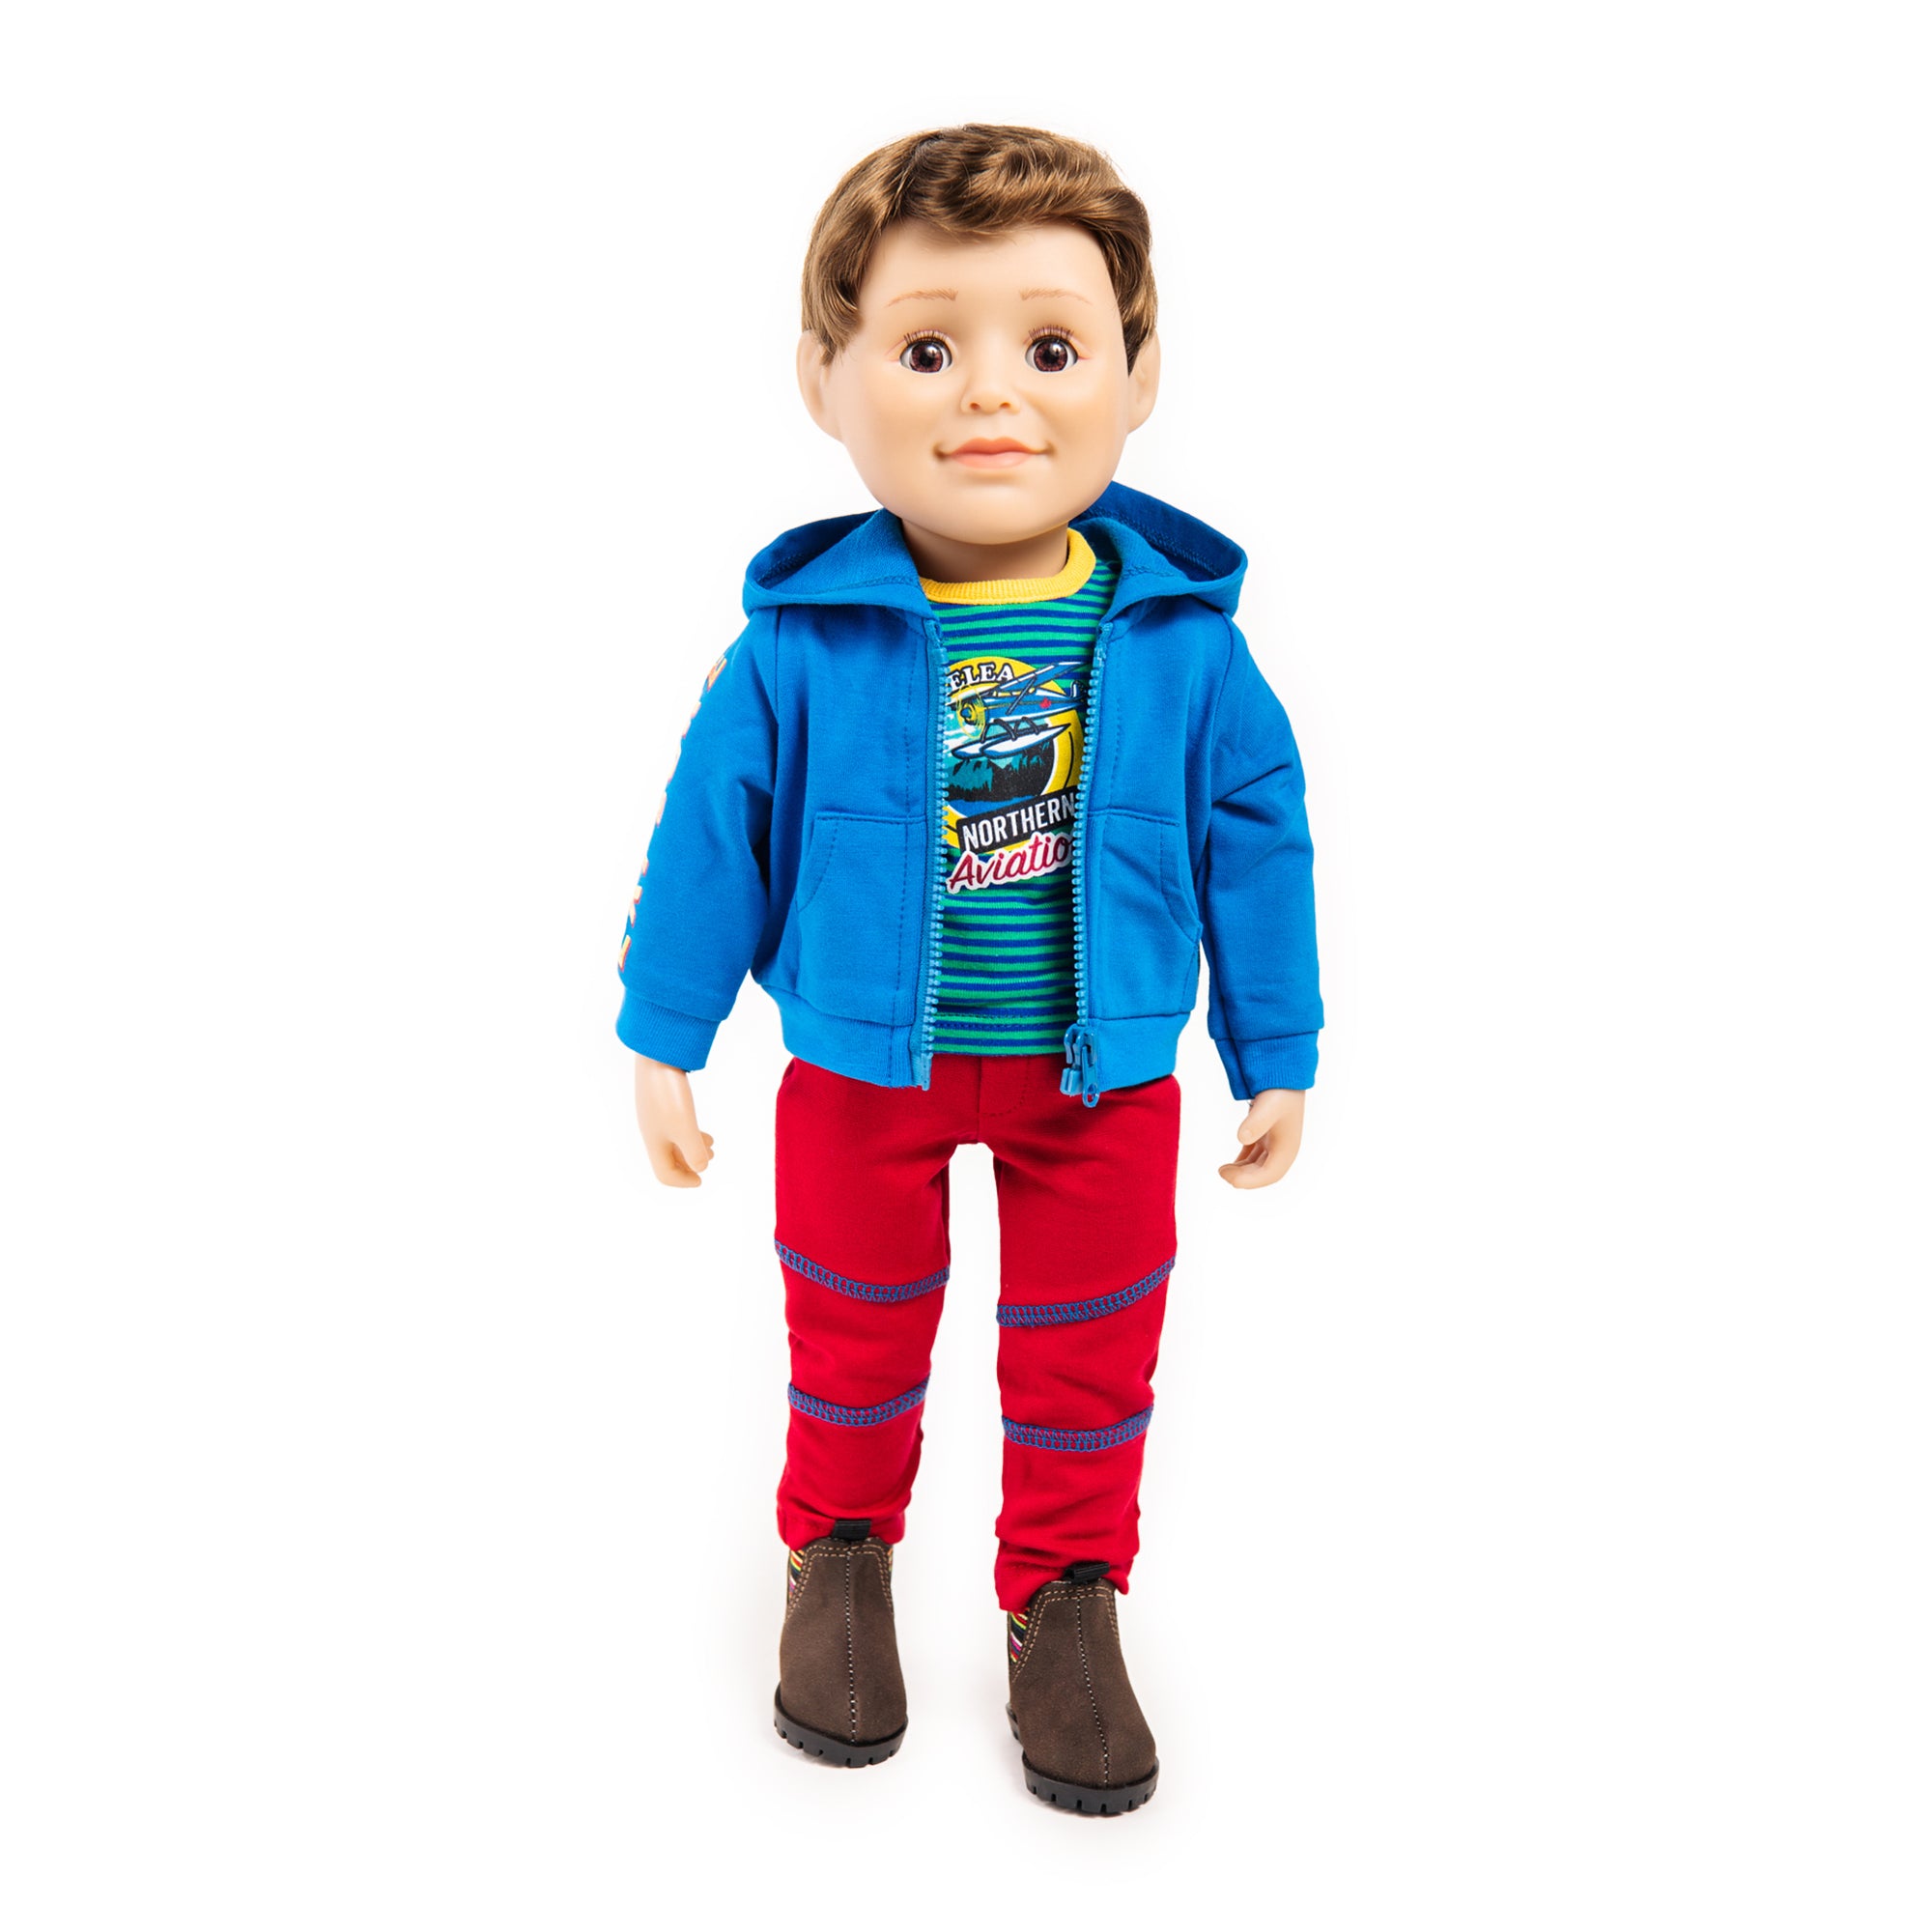 boy doll wearing casual outfit